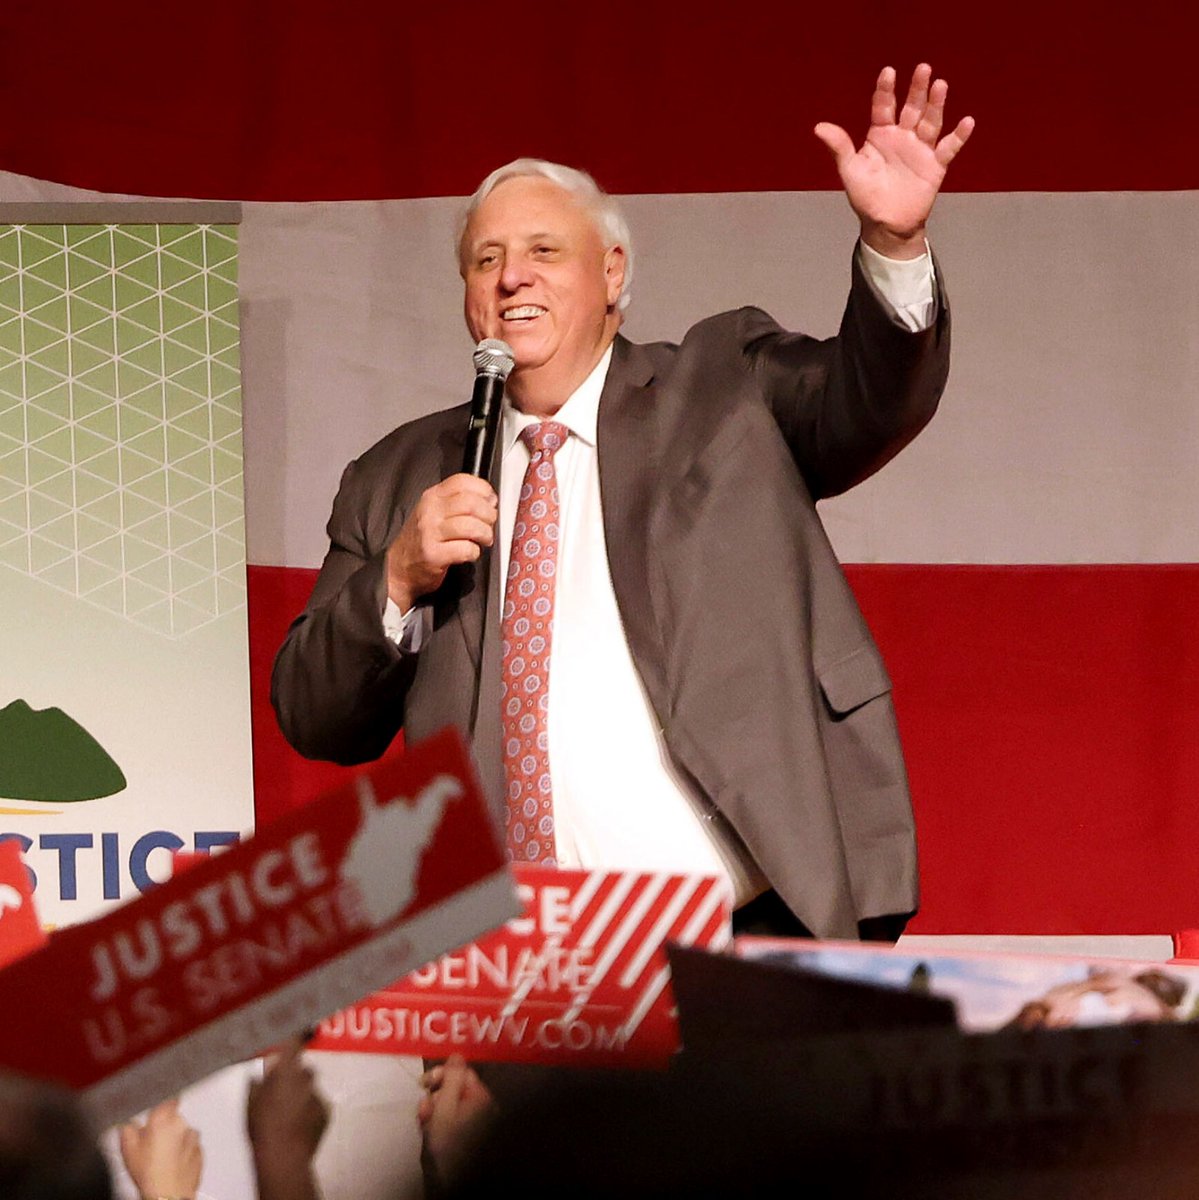 🚨🇺🇸 BREAKING: GOVERNOR JIM JUSTICE WINS GOP SENATE PRIMARY IN WEST VIRGINIA

West Virginia Governor Jim Justice has secured the Republican nomination for the U.S. Senate, defeating six other candidates. 

Justice will face a Democratic candidate in the general election to